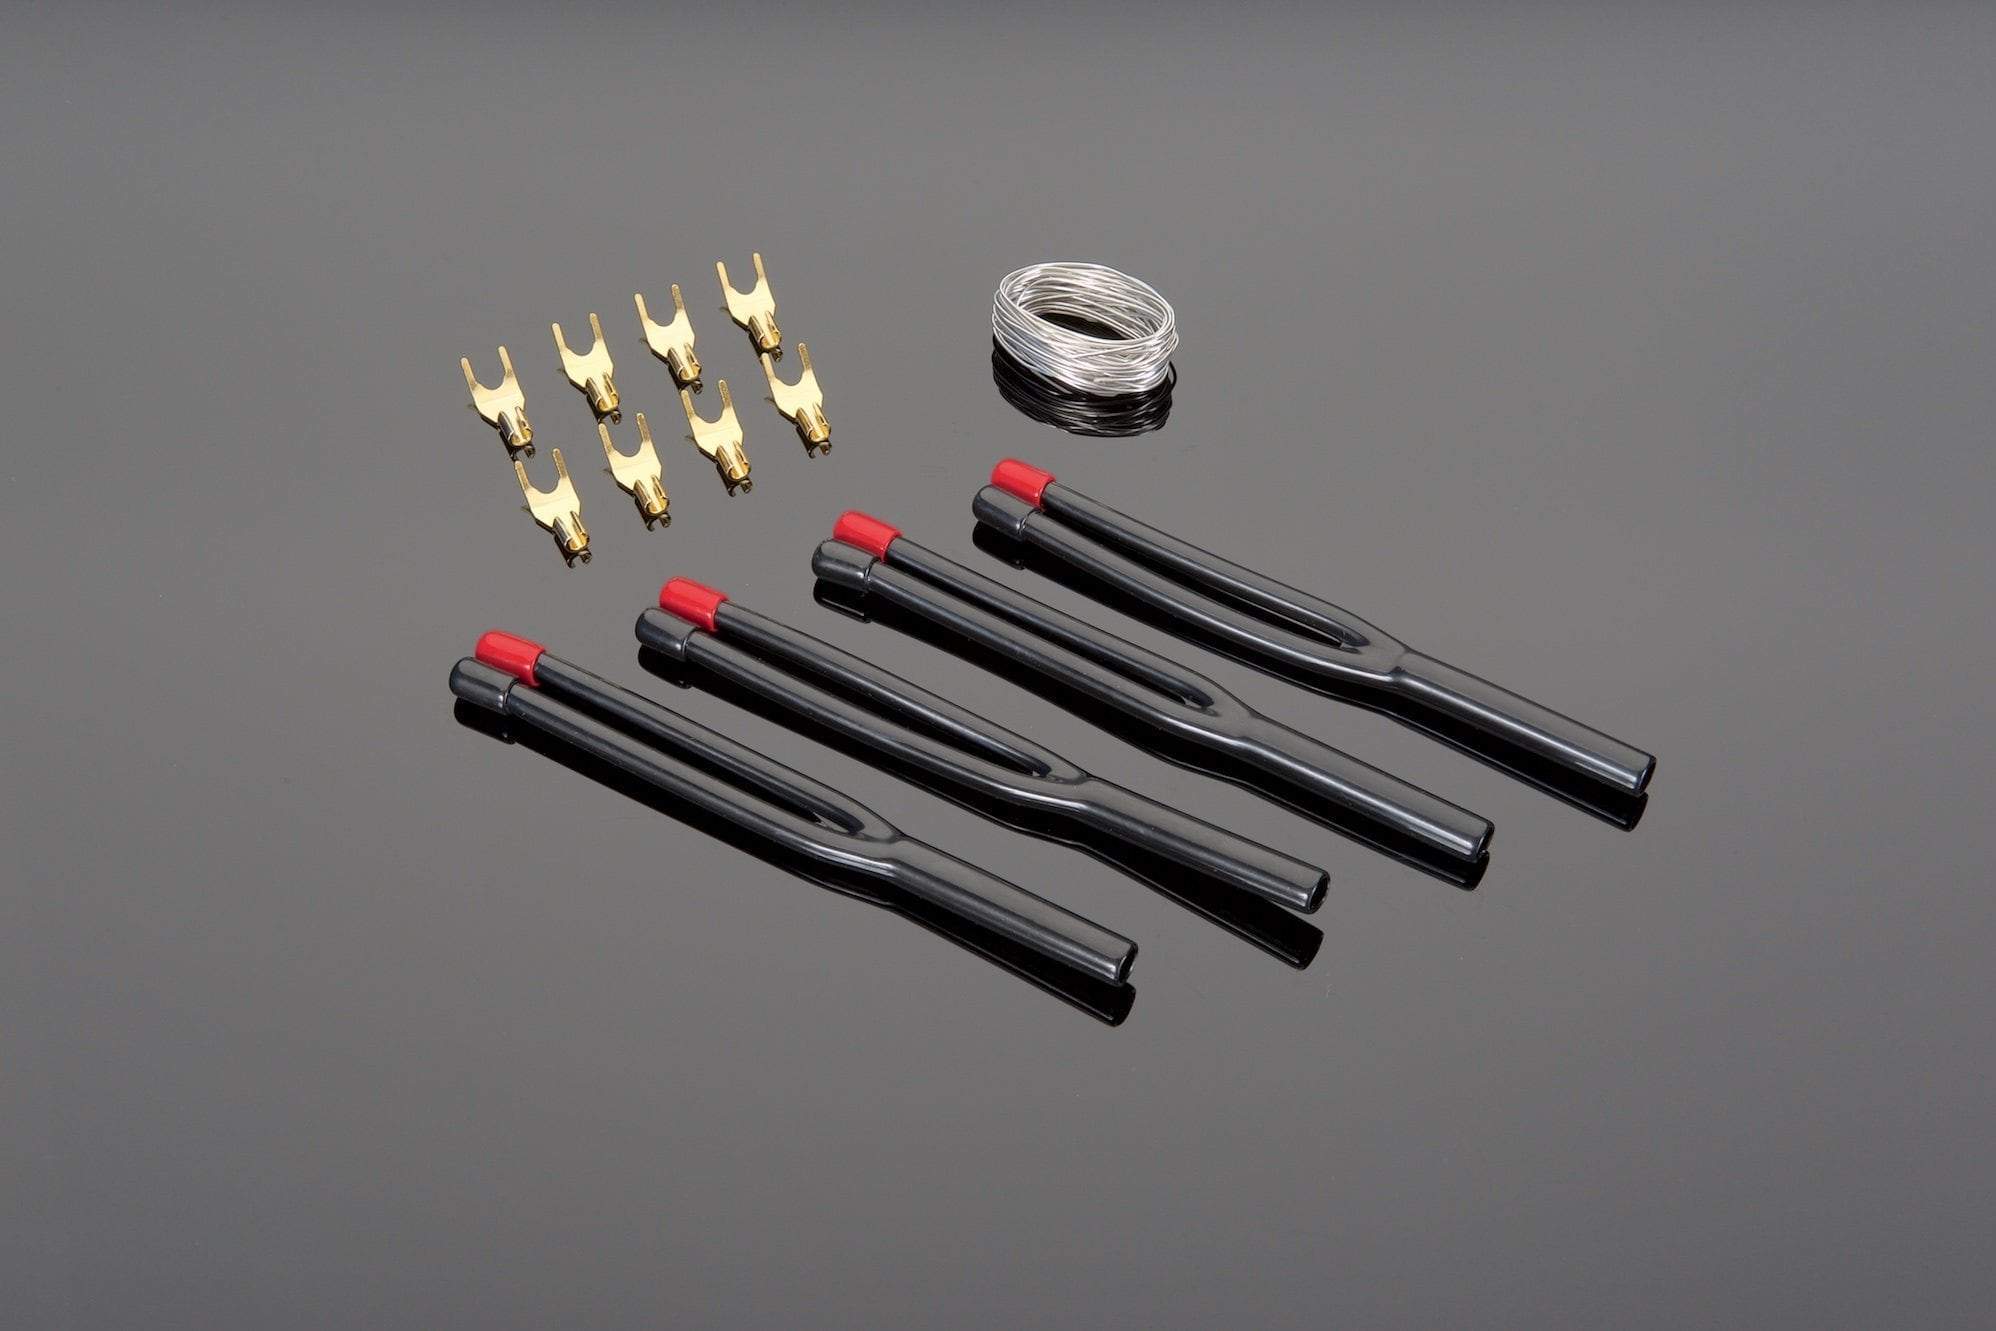 Transparent Audio Solder Termination Kits for High Performance 12-2 and 14-2 DIY Speaker Cable